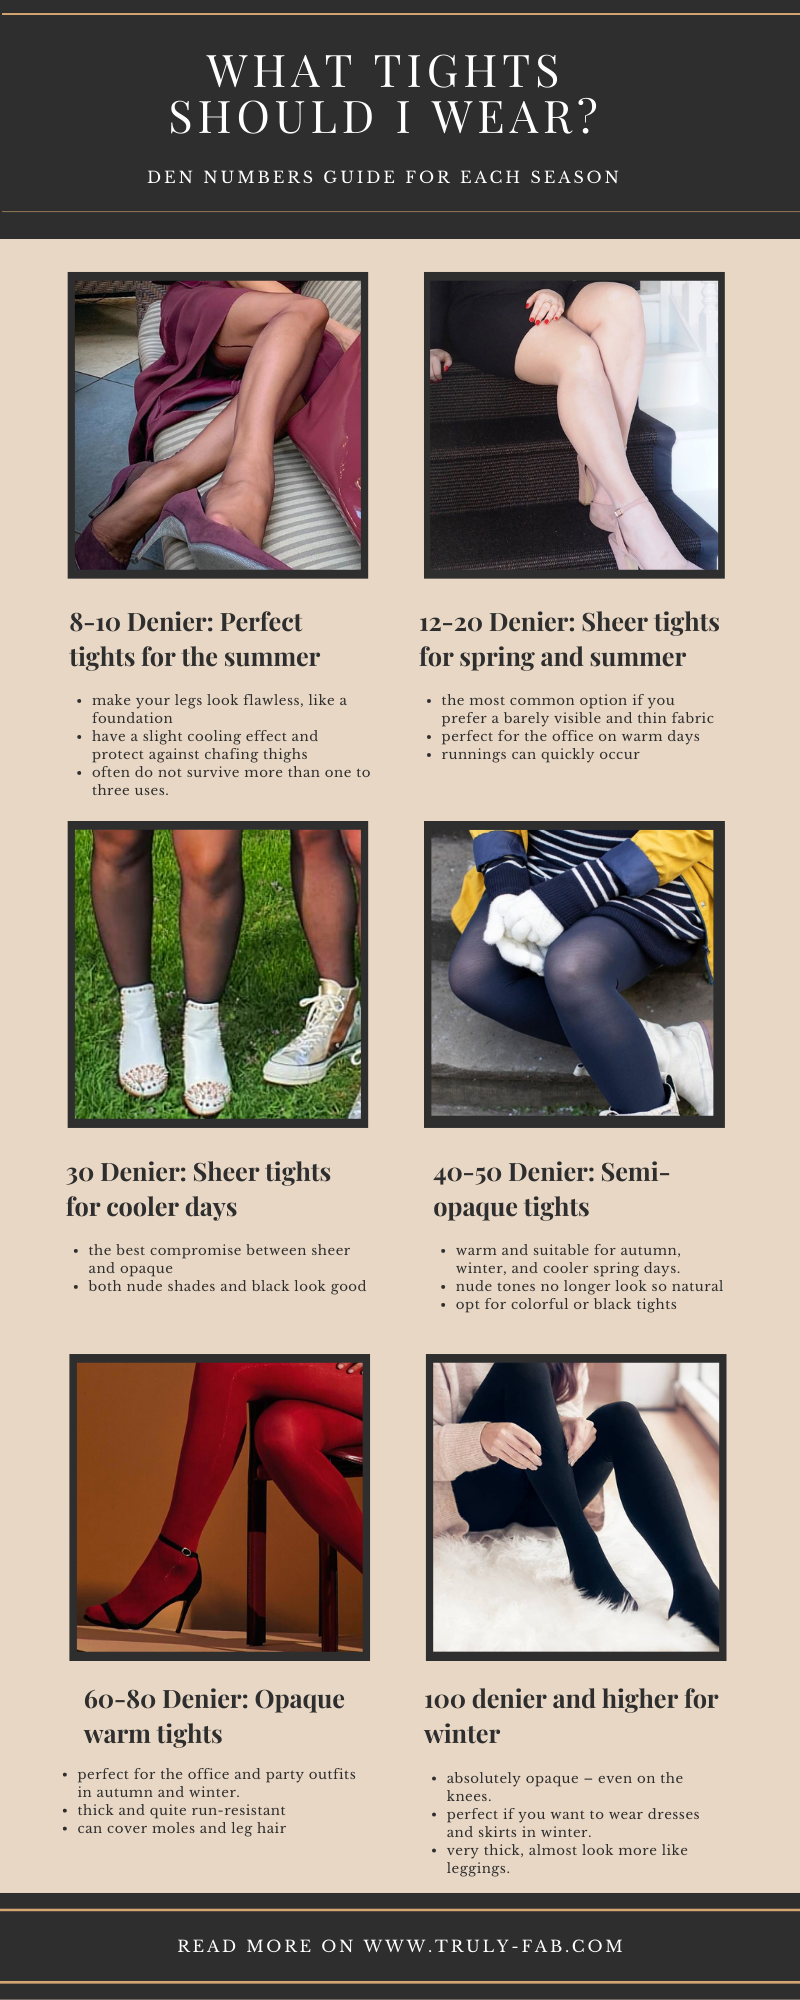 denier tights guide infographic